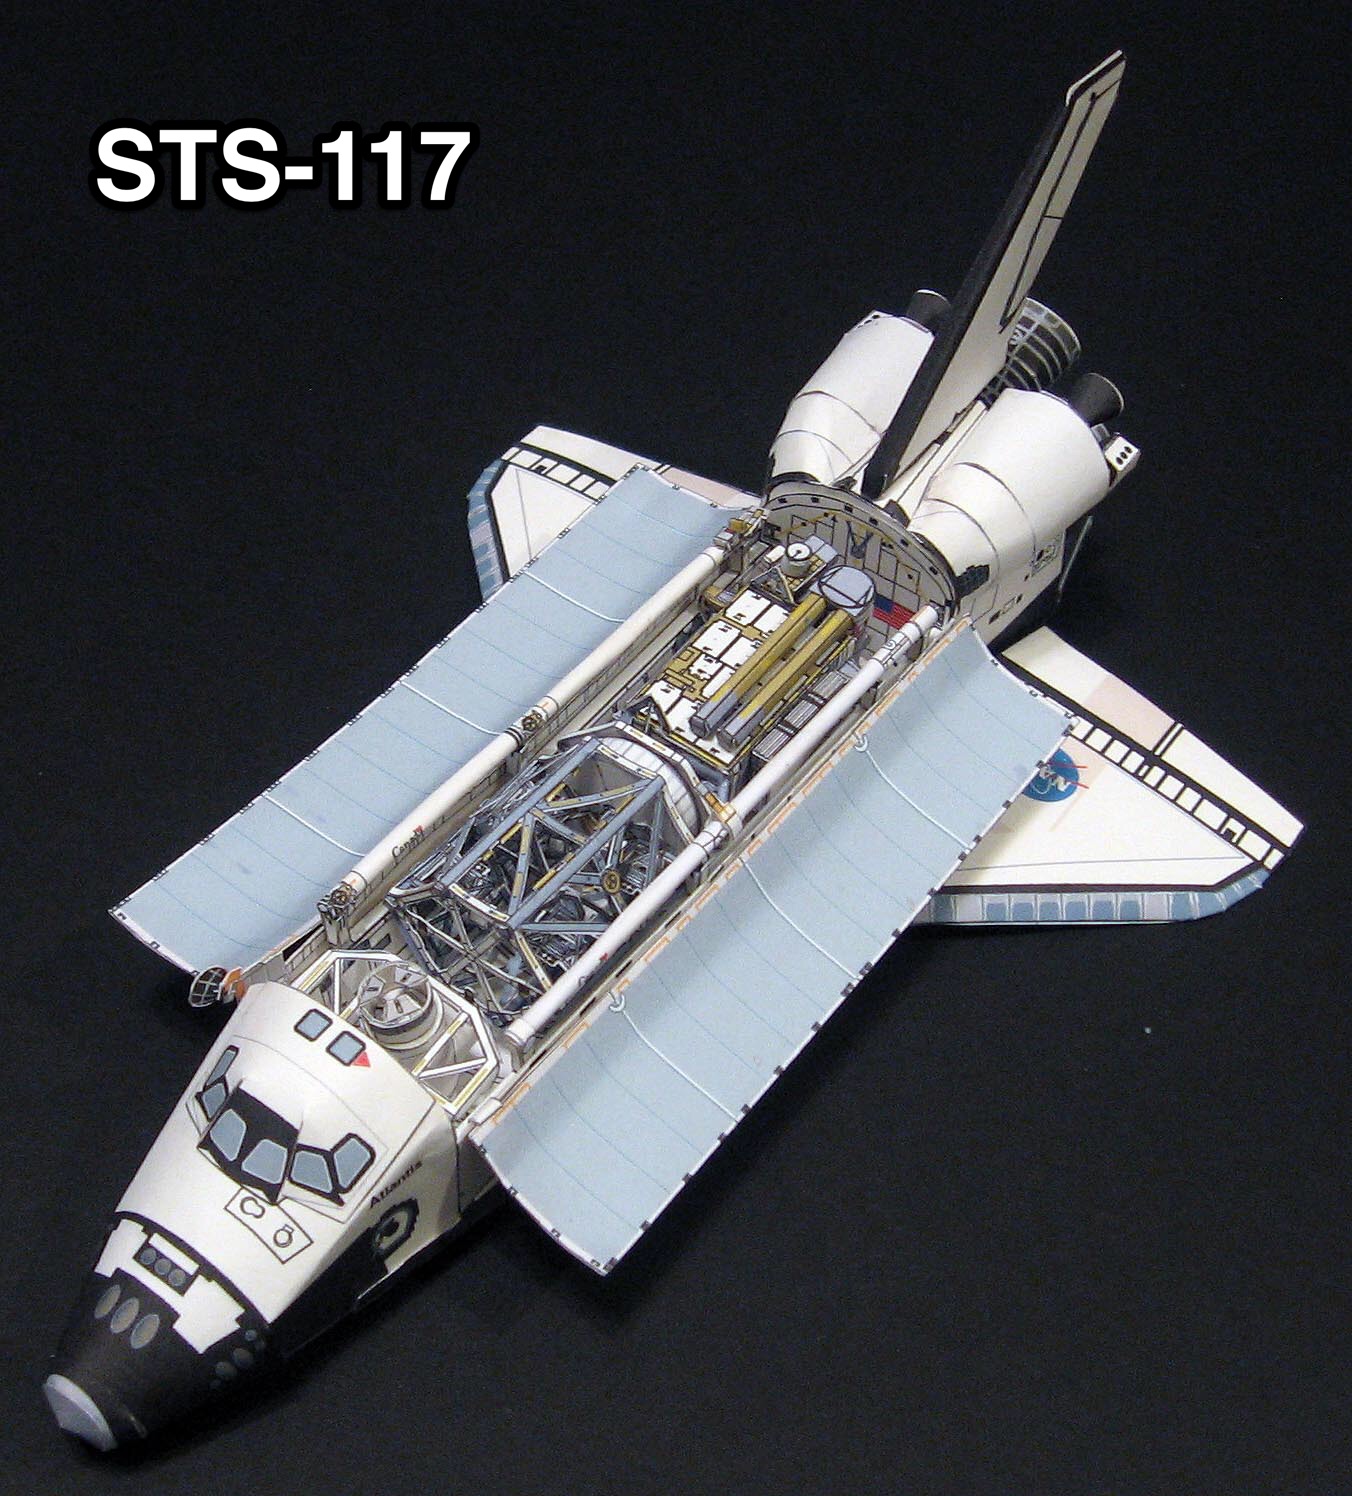 Proteus magical journey of the spacecraft 3D paper model Paper model kit 